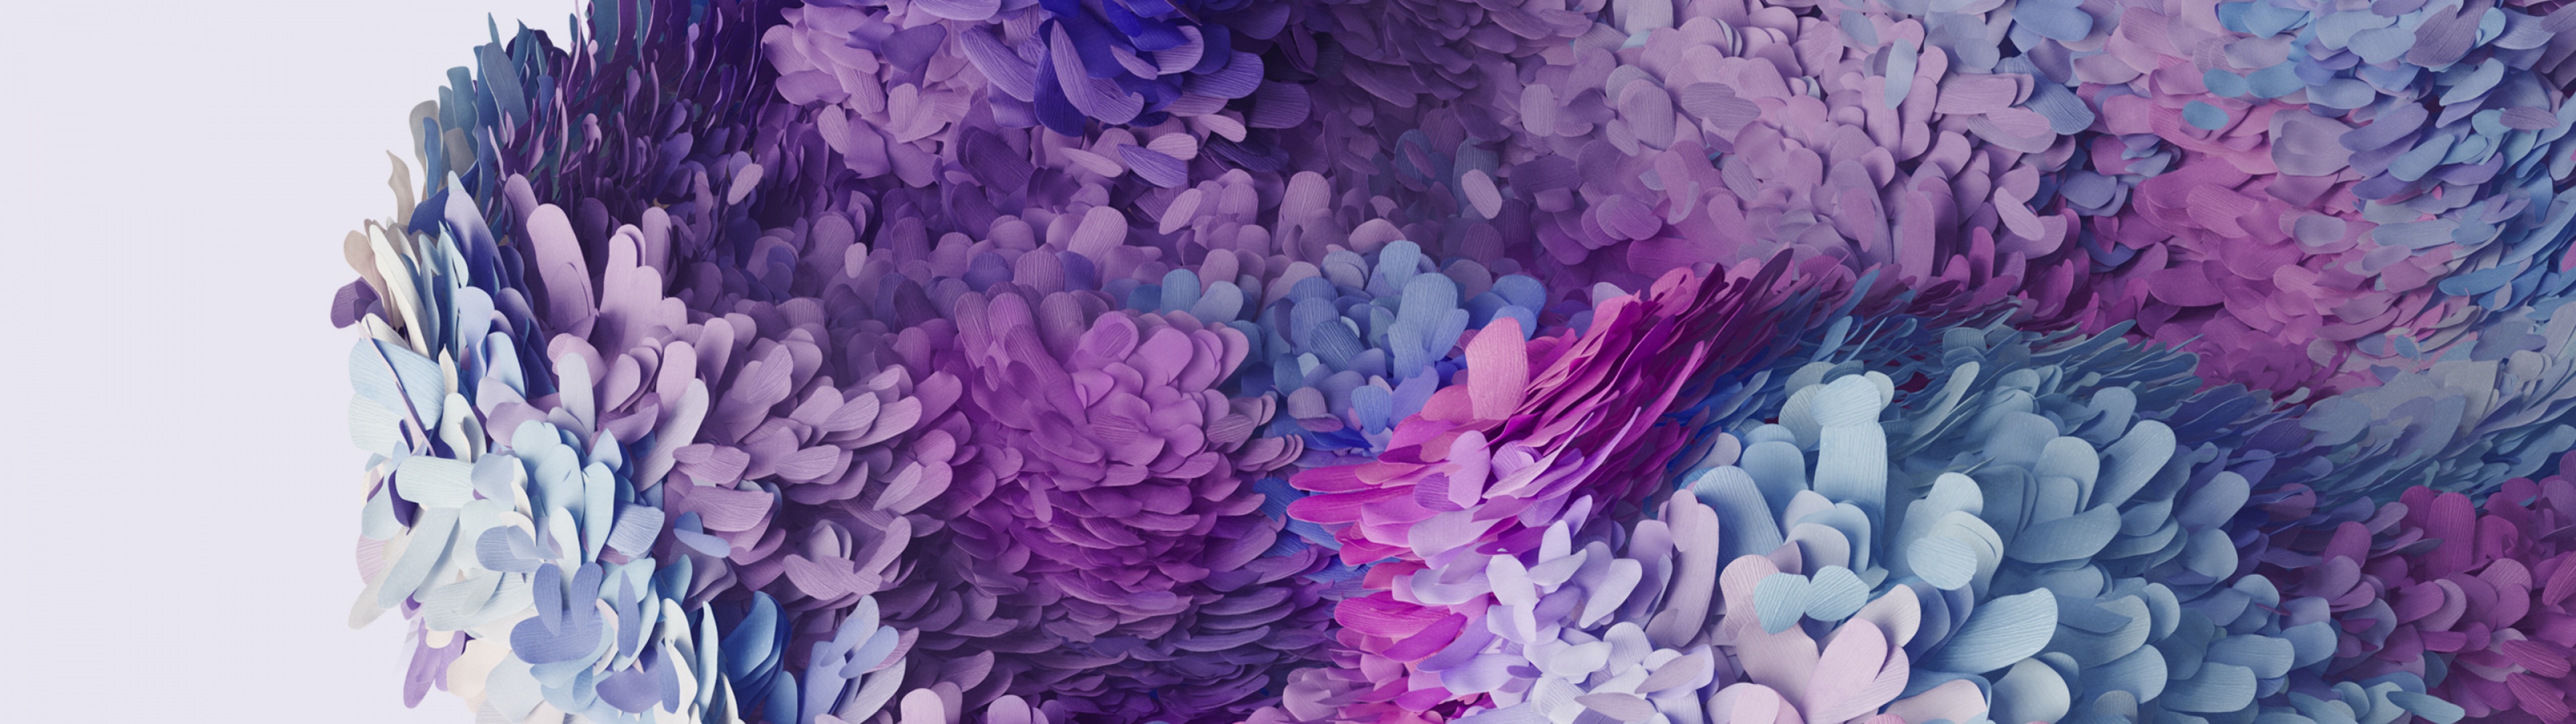 Here are some of the Samsung Galaxy S20 wallpapers  Android Authority